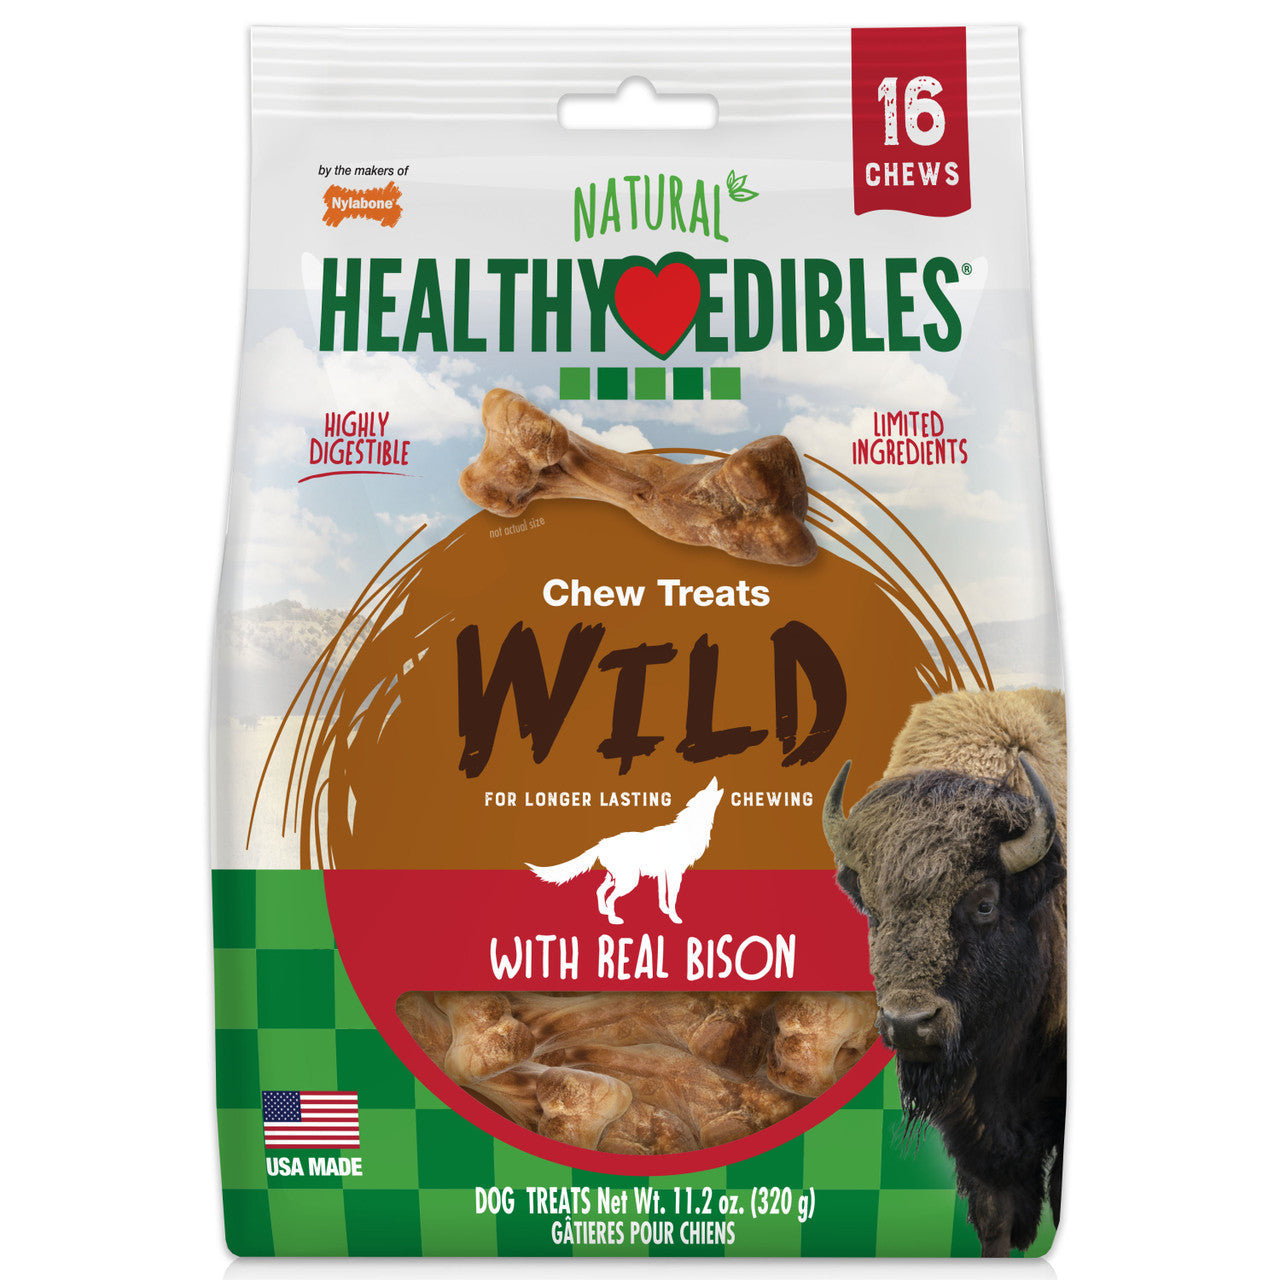 Nylabone Healthy Edibles WILD Natural Long Lasting Bison Flavor Dog Chew Treats Wild Bone Small (Pack of 16)